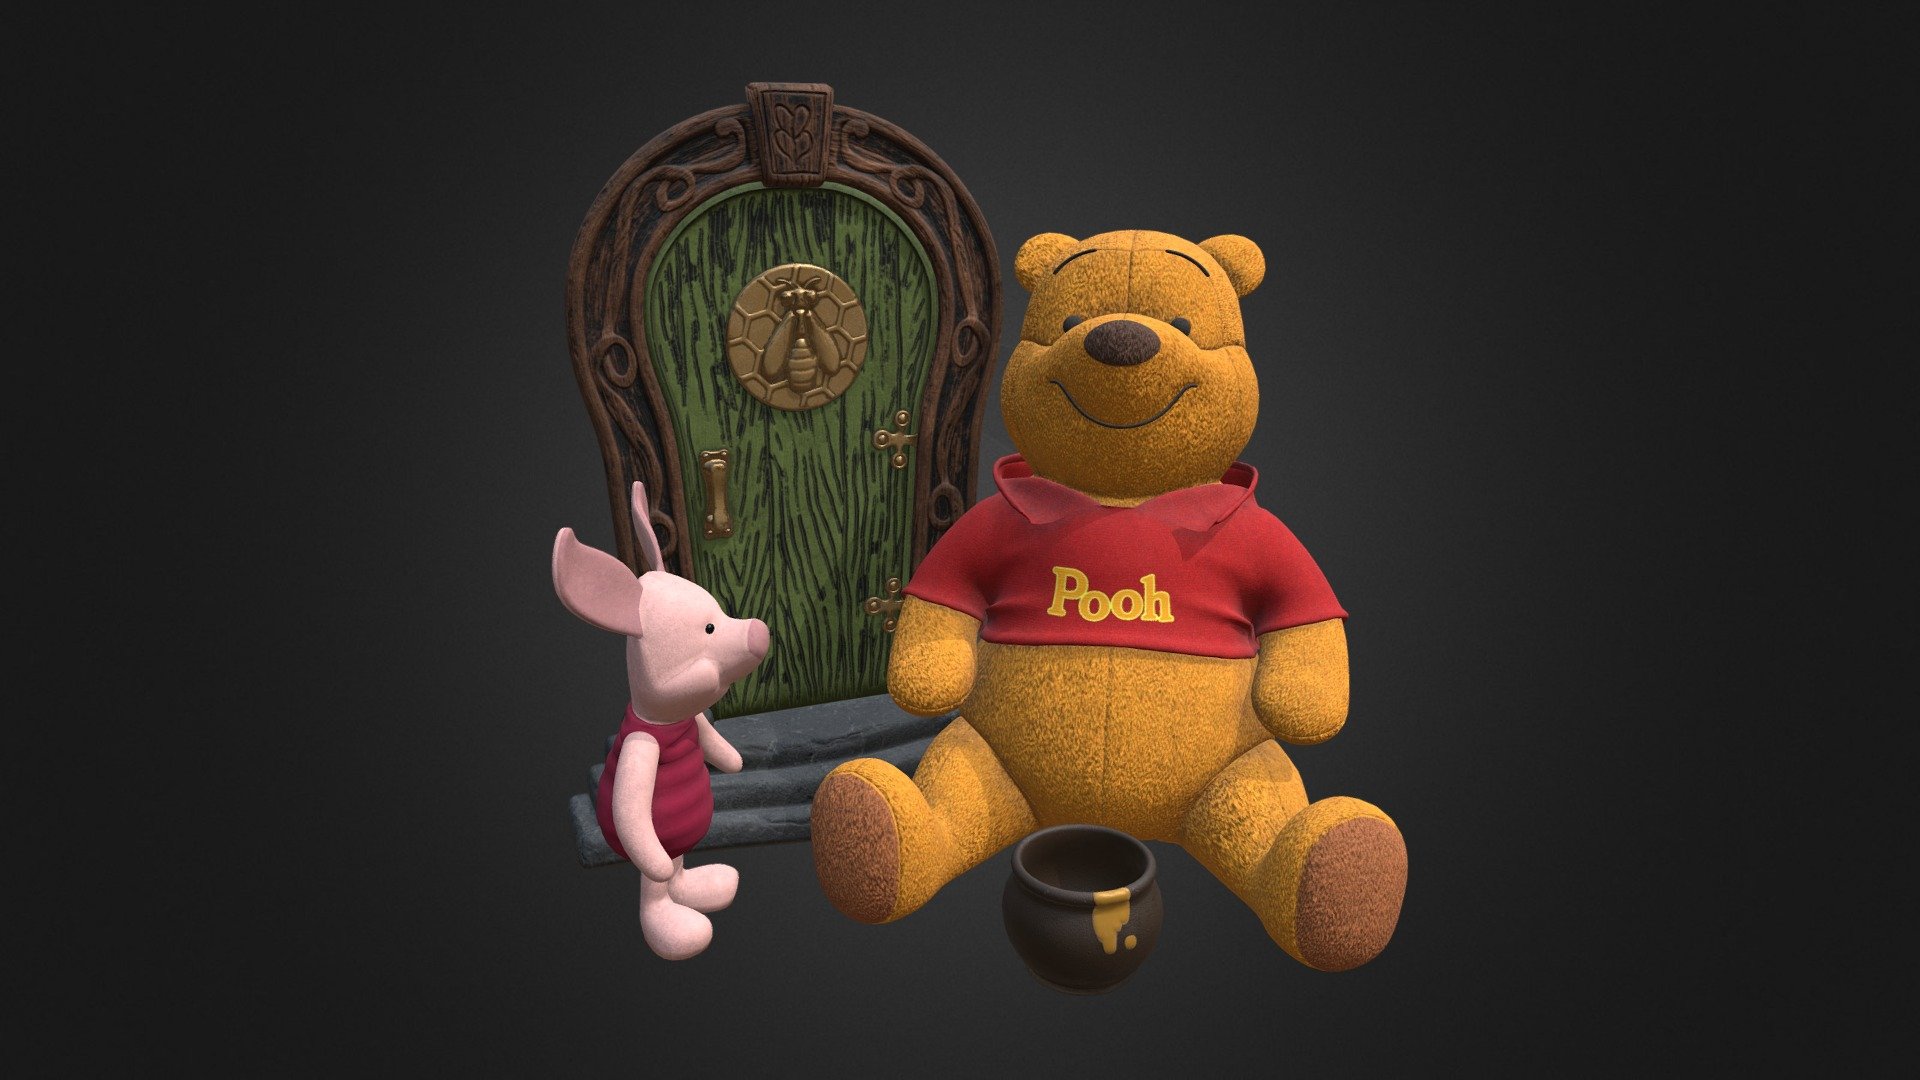 Set includes
- 3d model of soft toy Vinnie the Pooh height 550mm 22830 polys 23012 verts 2048x2048 textures
- 3d model of soft toy Piglet Plush 14.5 inches 4822 polys 4820 verts 2048x2048 textures
- 3d model Bee Keeper Fairy Door by HiddenWorlds 13834 polys 13853 verts4096x4096 textures
- archive includes a height map
The set is available for purchase in parts.
Thank you for watching! - Vinnie the Pooh toy Set - 3D model by egoroshe 3d model